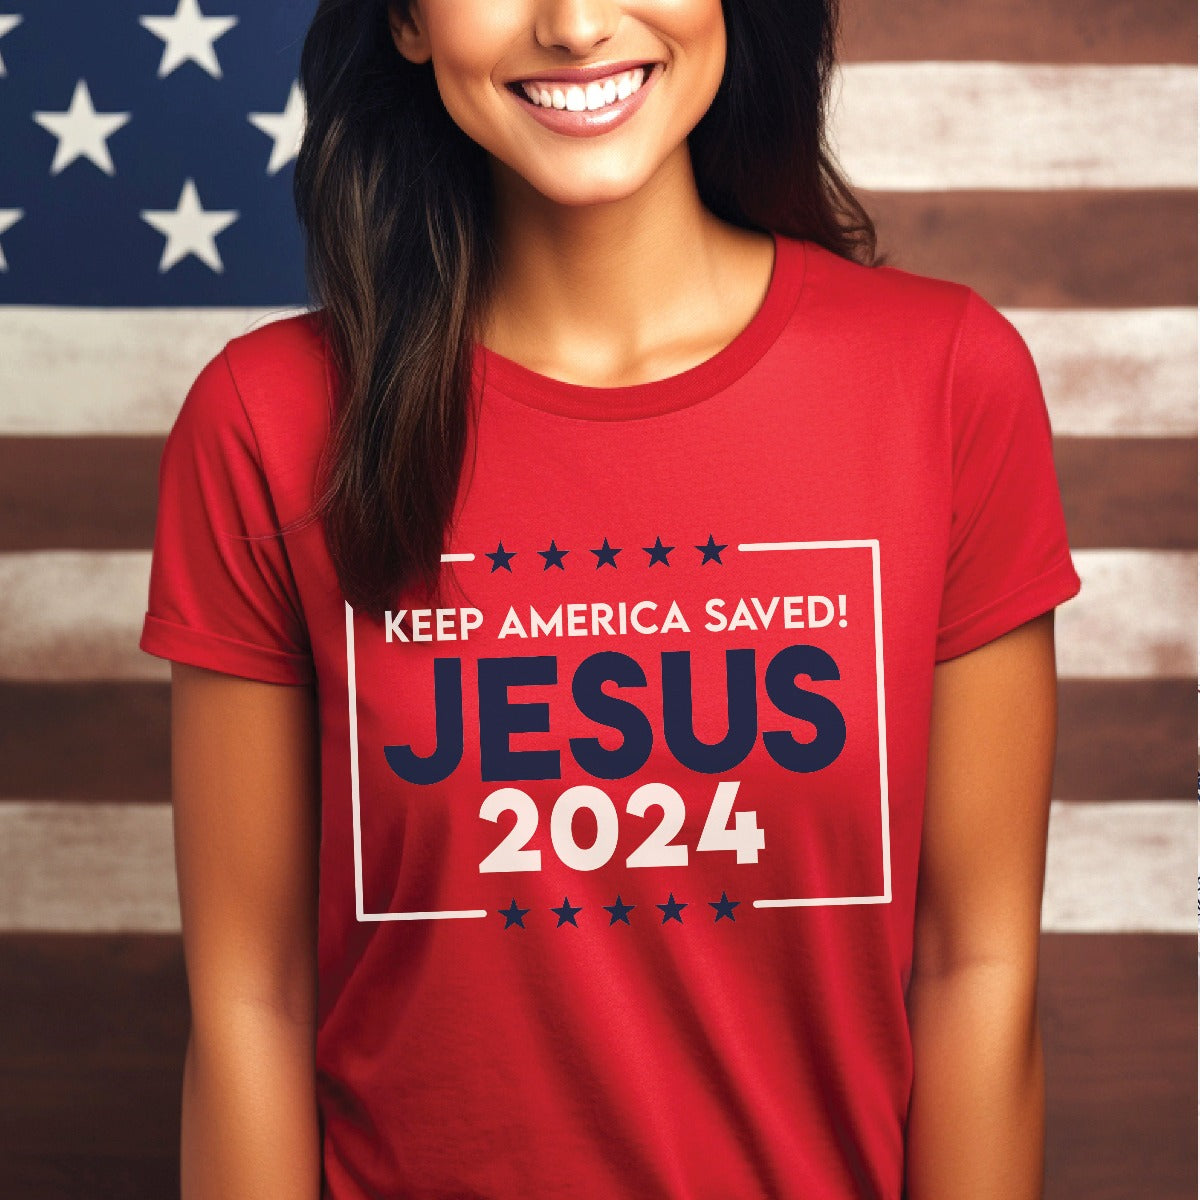 Patriotic young woman wearing a Red Bella Canvas 3001 Presidential election vote unisex Christian t-shirt with "Jesus 2024 Keep America Saved" printed in bold white and navy blue fonts, made in the USA for men and women God & Country Patriots